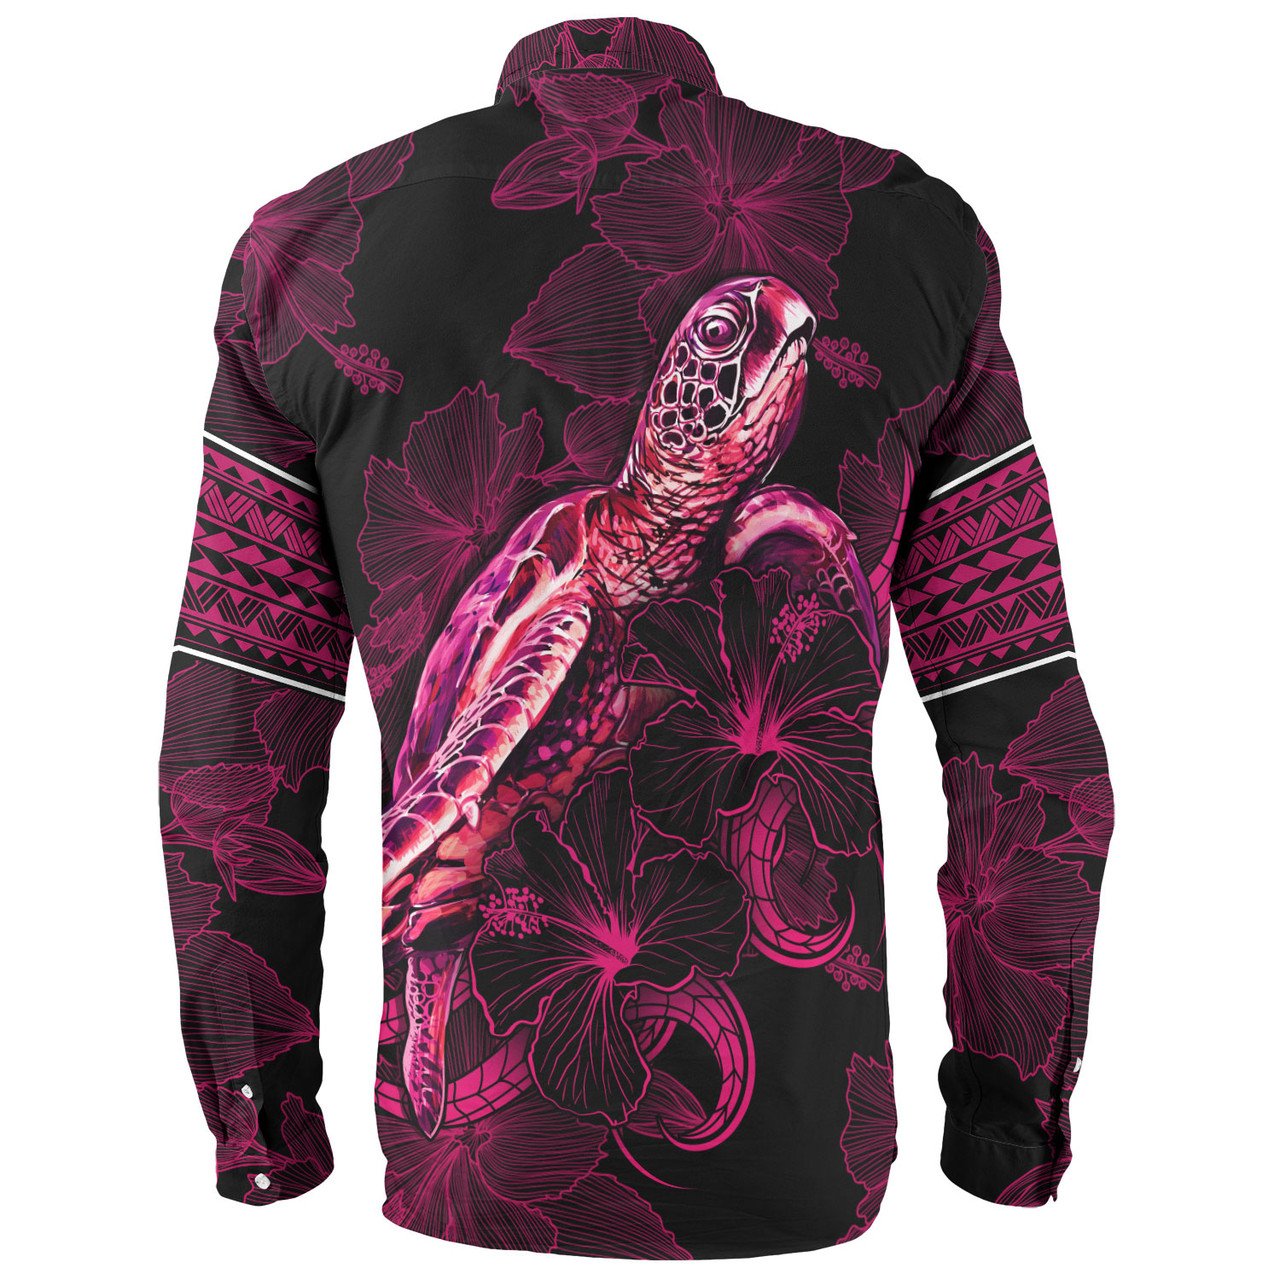 Papua New Guinea Long Sleeve Shirt Sea Turtle With Blooming Hibiscus Flowers Tribal Maroon